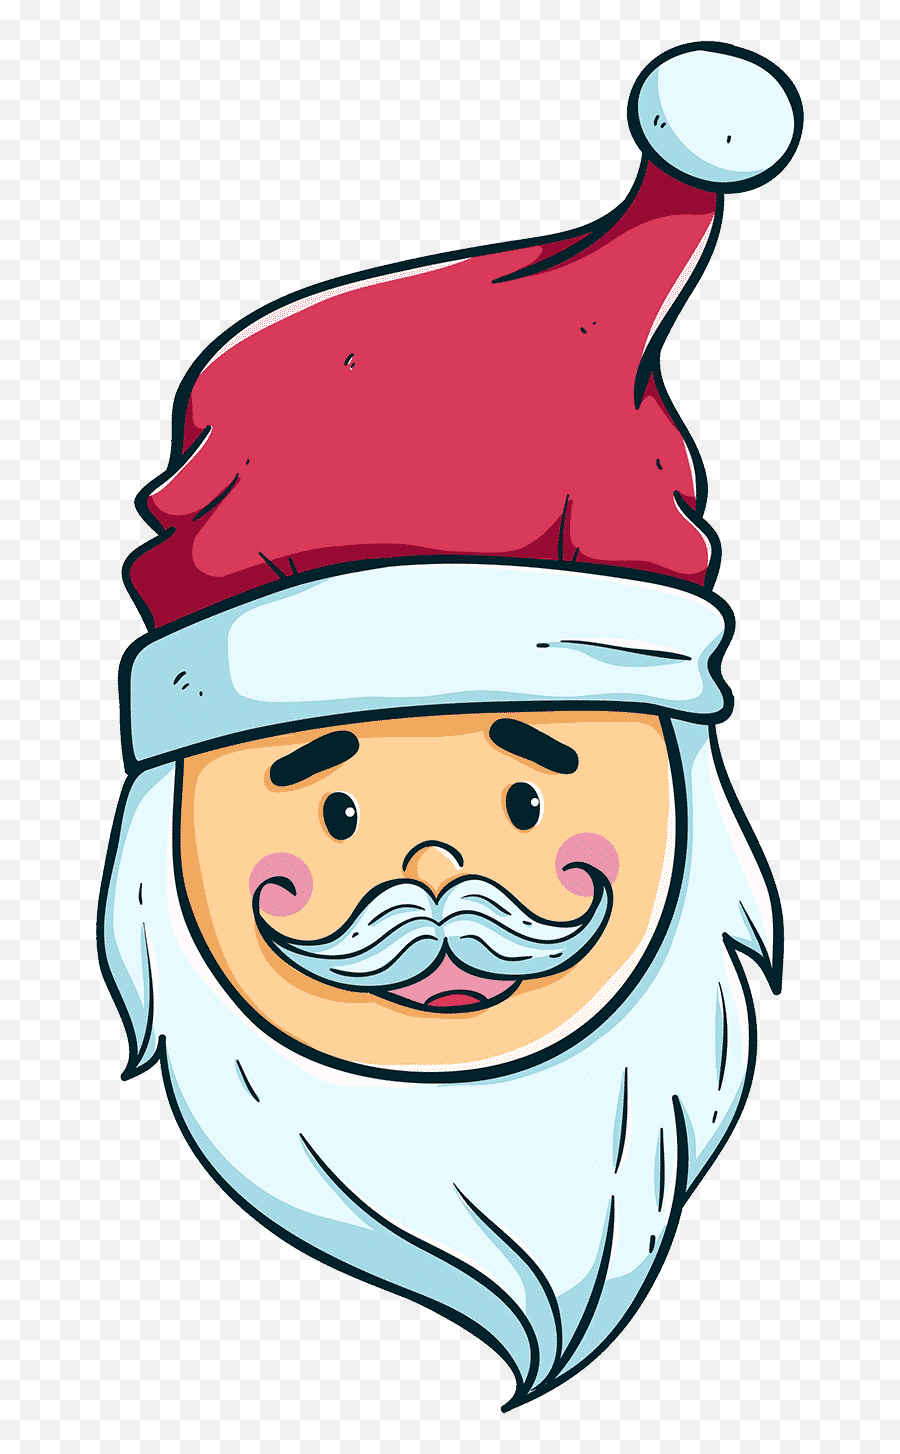 Free U0026 Cute Santa Face Clipart For Your Holiday Decorations Emoji,Adult Emojis Christmas